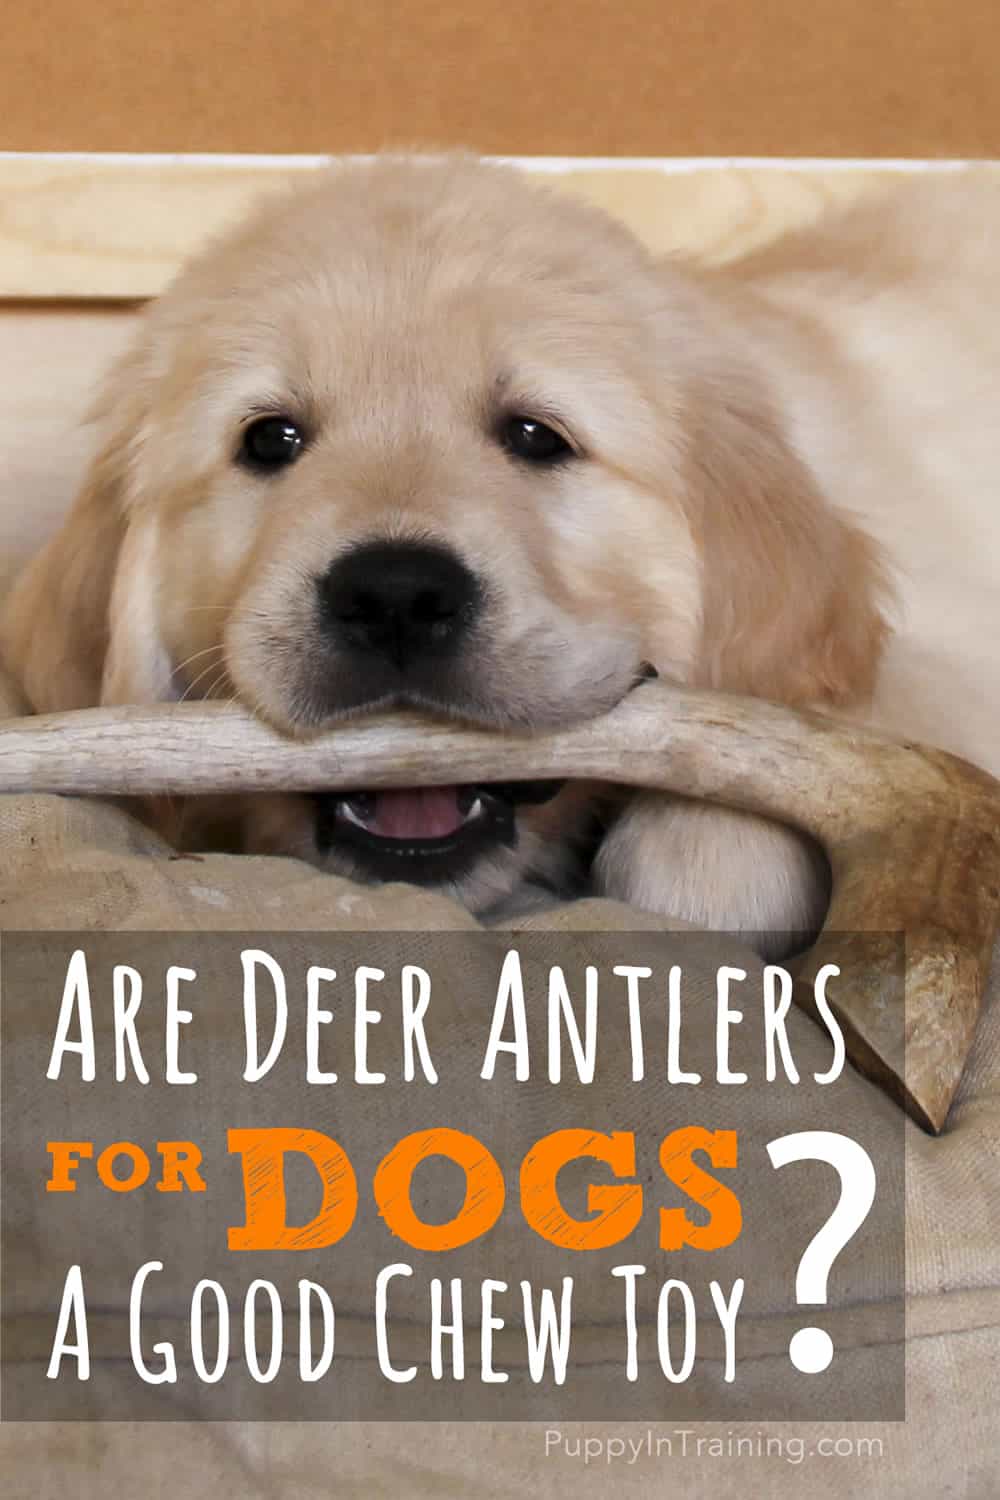 Are Deer Antlers For Dogs A Good Chew Toy?